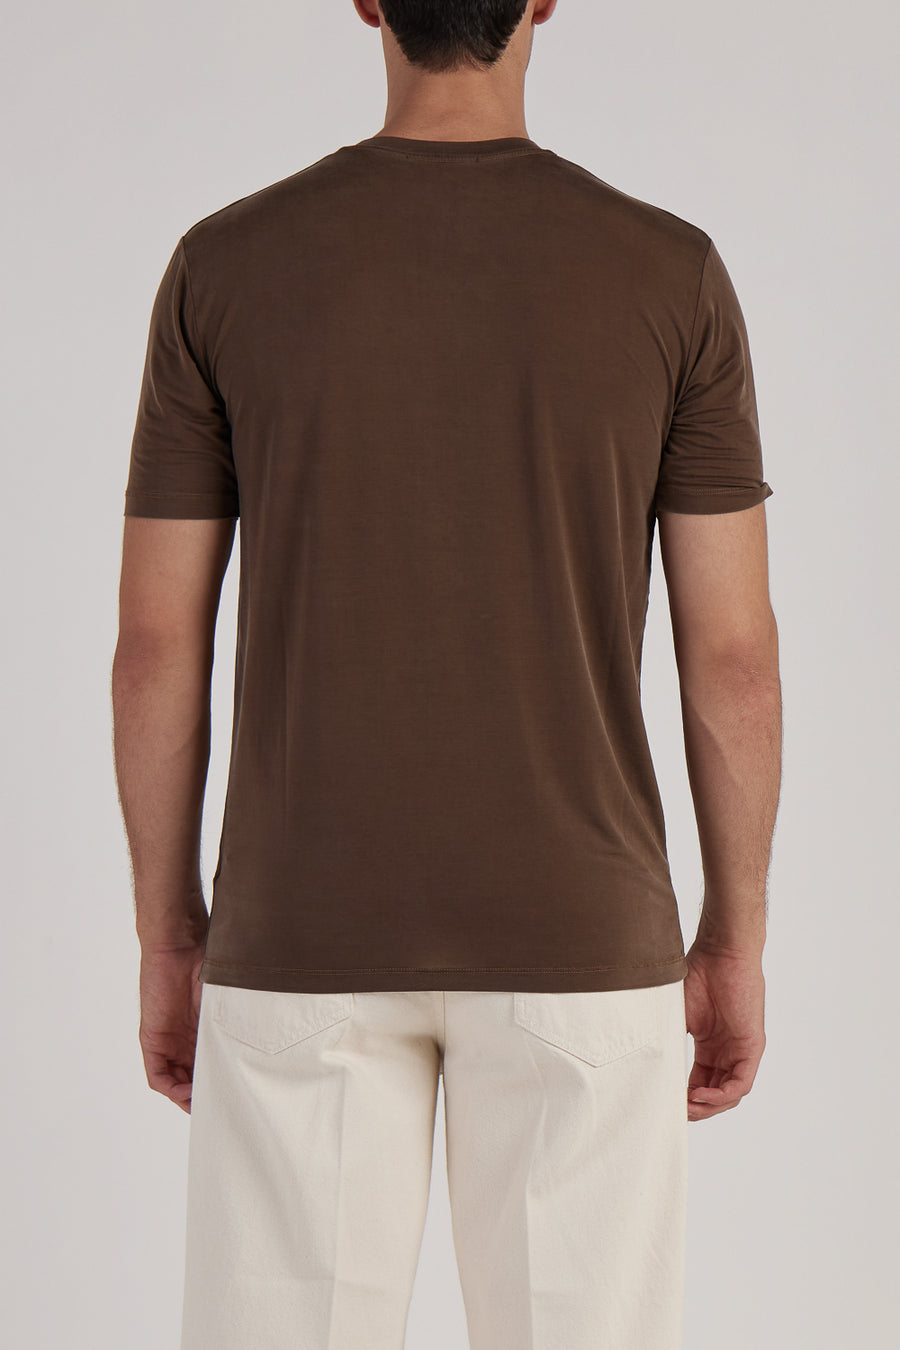 Buy the Daniele Fiesoli Cotton/Silk Round Neck T-Shirt in Brown at Intro. Spend £50 for free UK delivery. Official stockists. We ship worldwide.